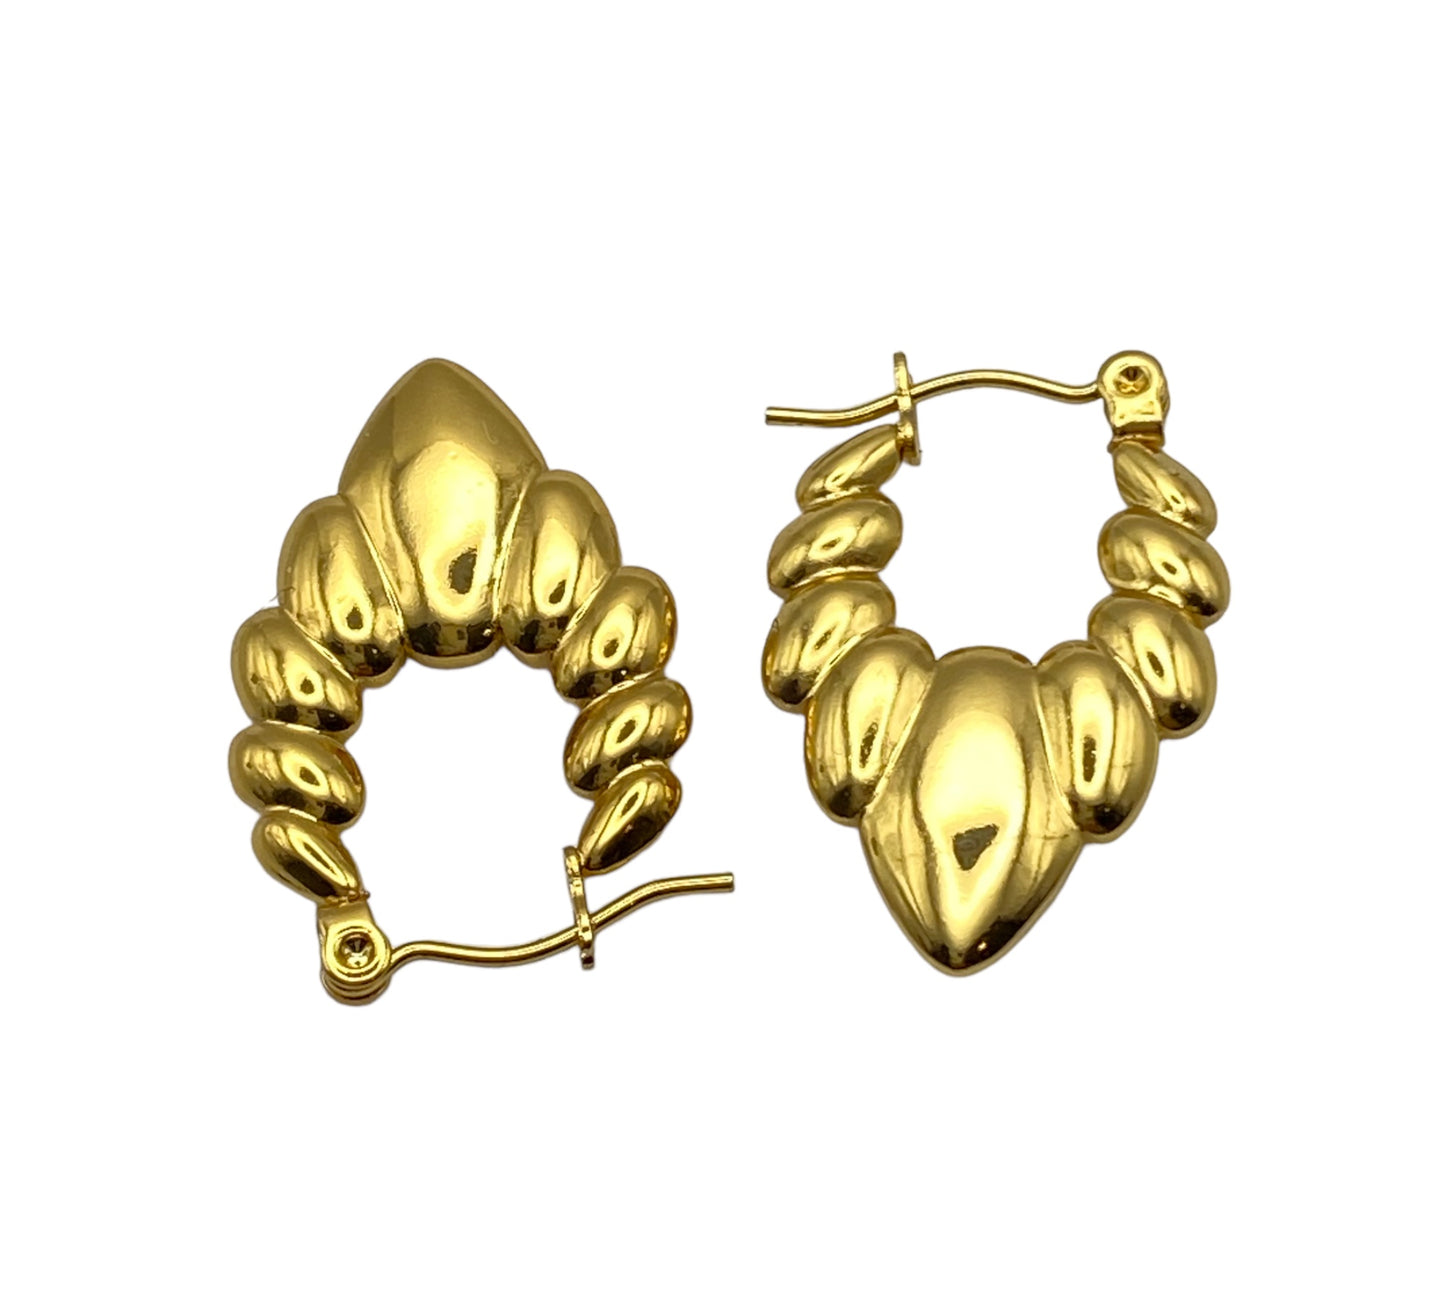 "AYLIN" gold plated vintage inspired earrings